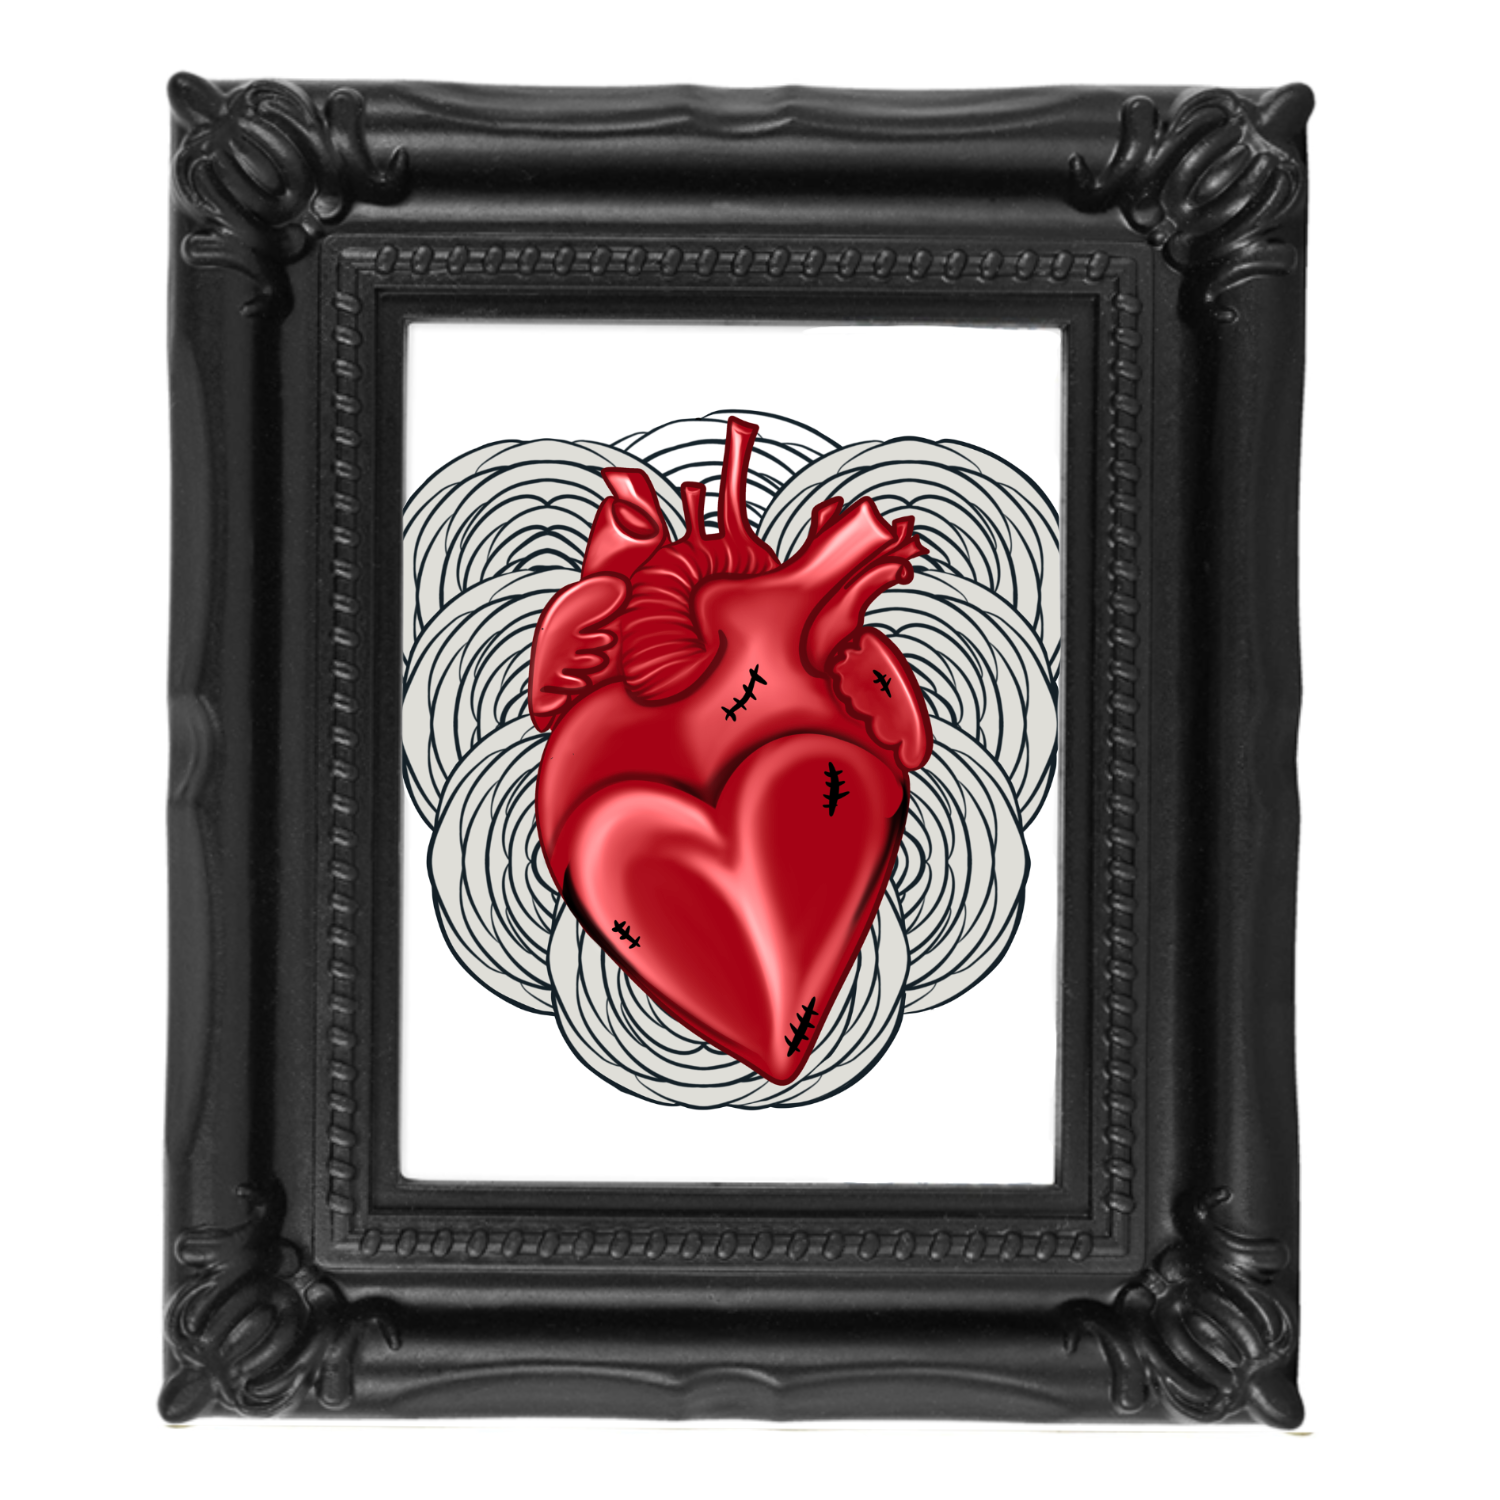 Neverending Stickers - Framed Mini Print - Anatomical Heart With Ranunculus Flowers - 4x3.5 in Frame -